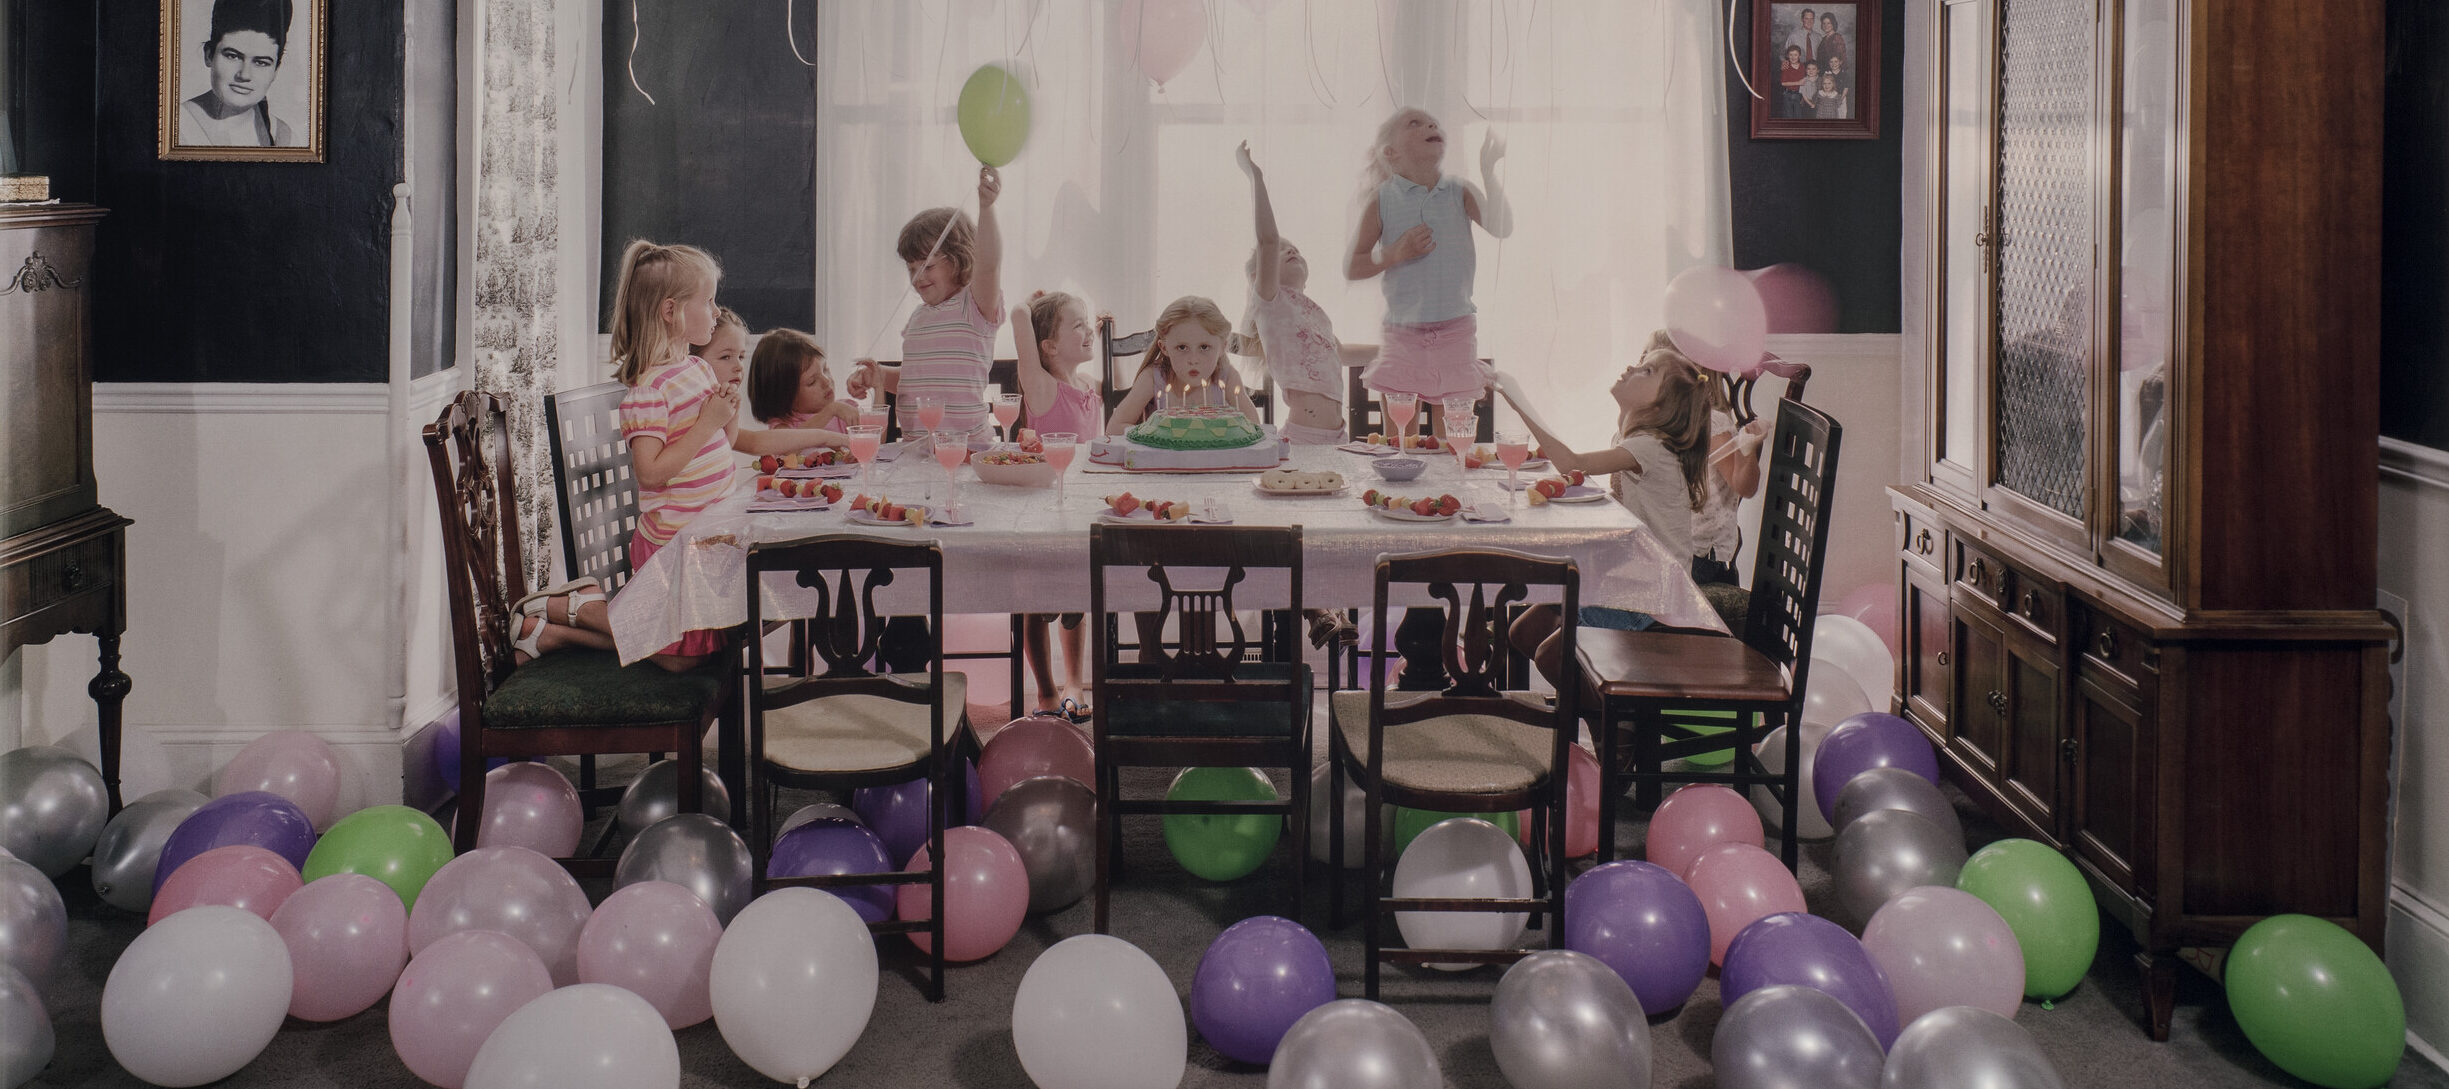 Green, purple, silver, white and pink balloons litter the floor and cover the ceiling of a navy-walled family dining room. In the middle of the room, a table is set with a pink table cloth. In the center of the table, a young girl blows out the candles on her birthday cake while looking straight ahead. Around her, nine other young girls jump, spin, and play.